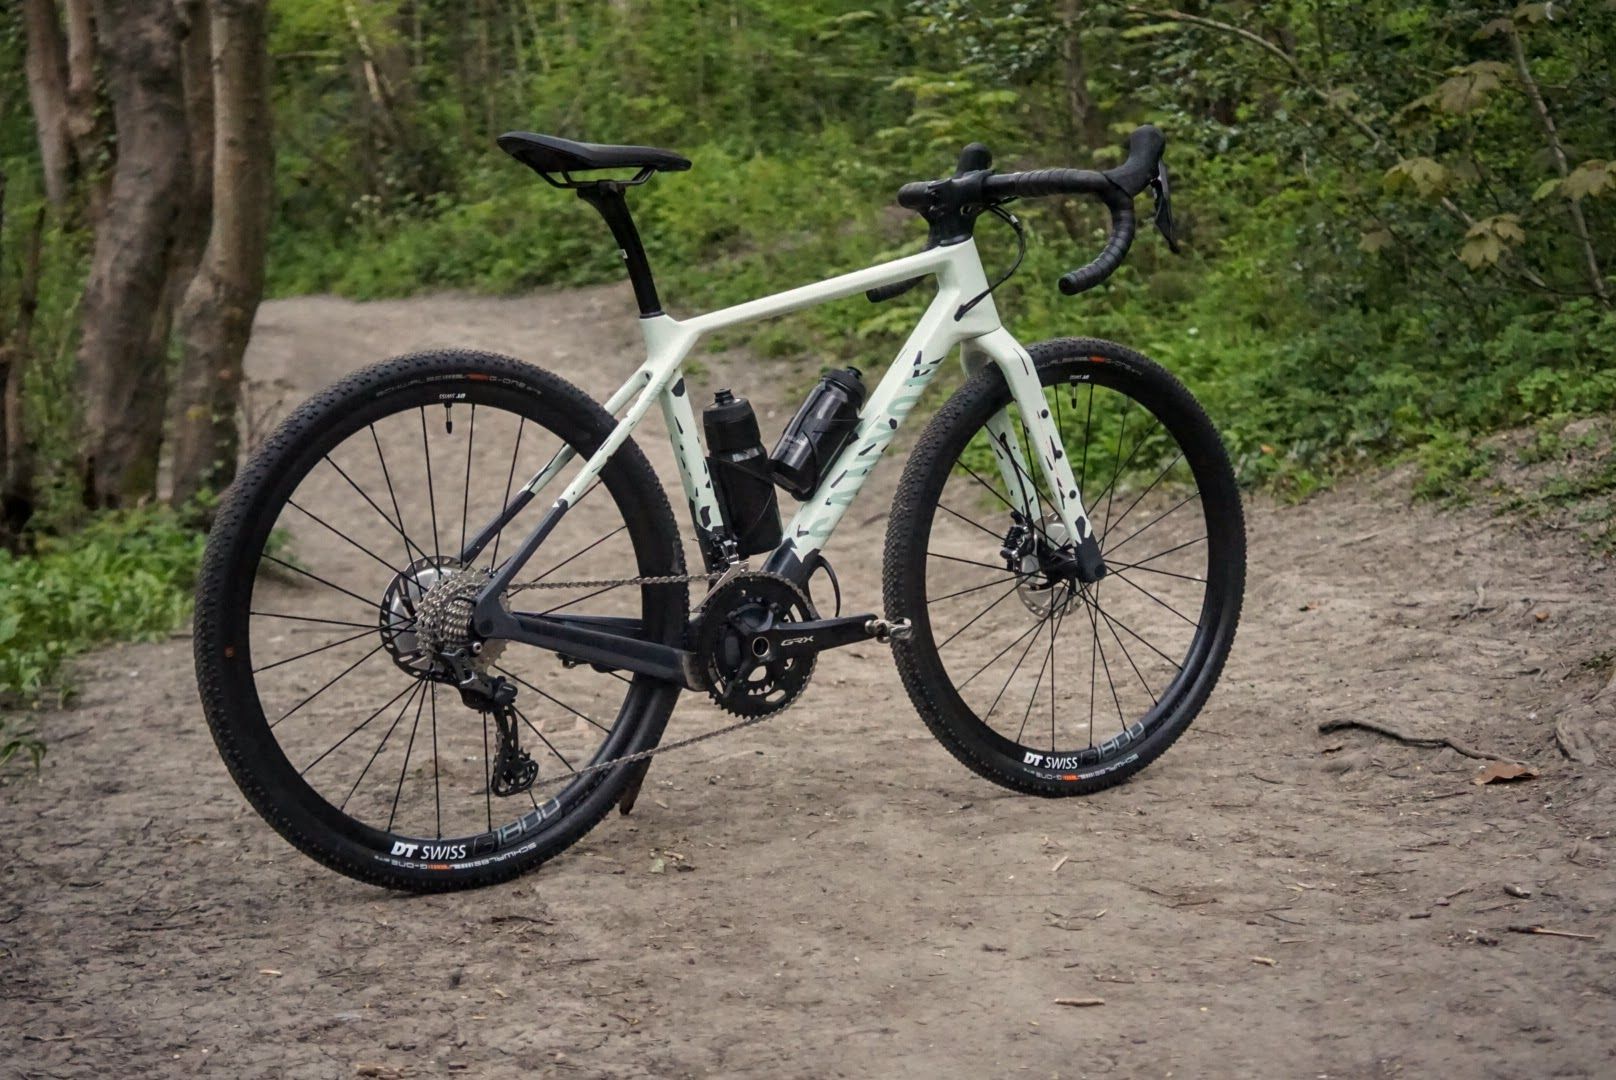 Gravel bike vs Cyclocross bike: What’s the difference?